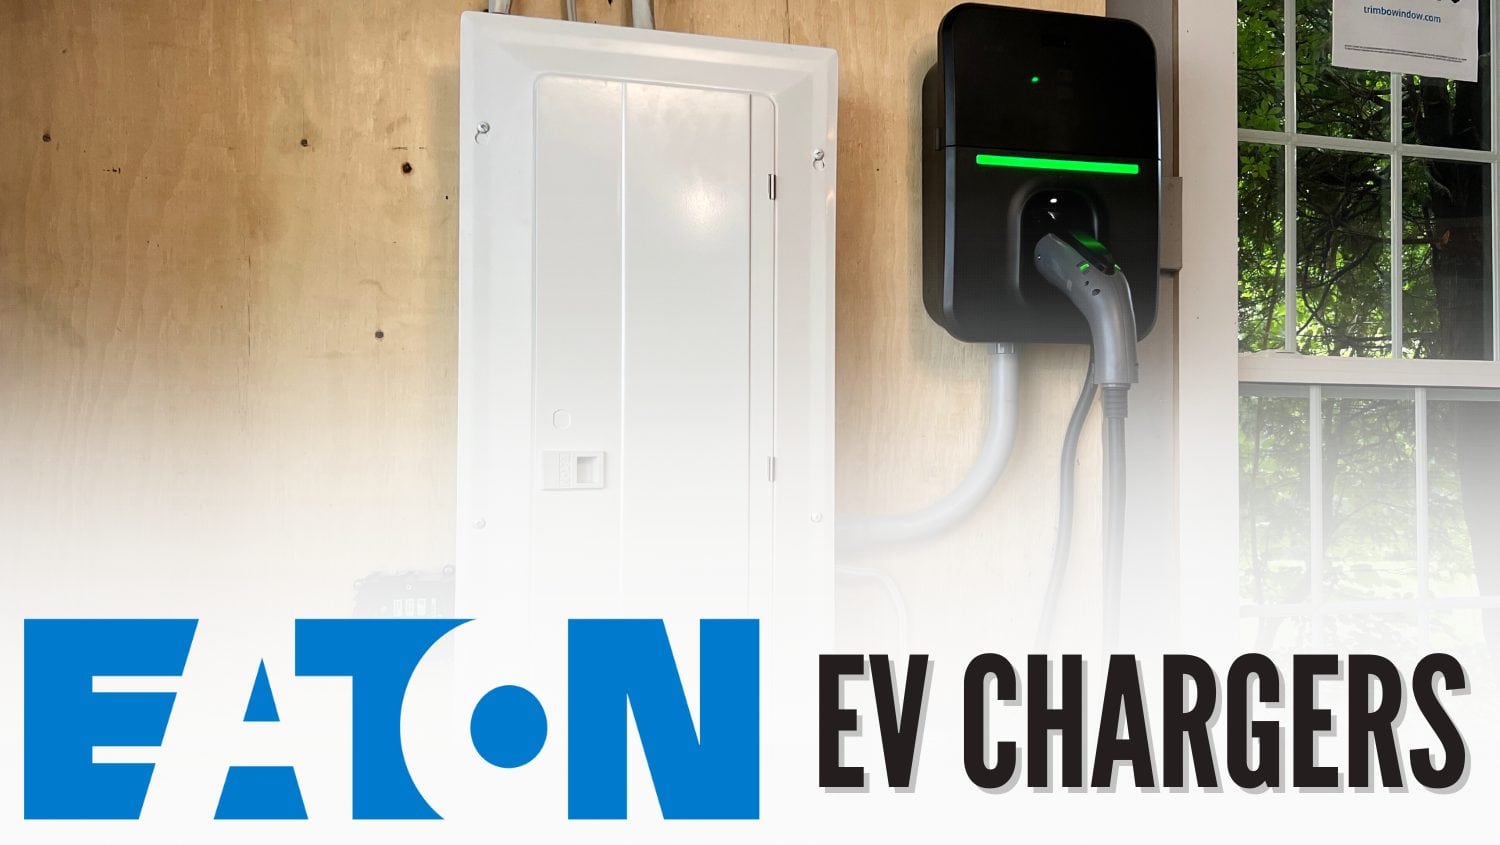 EATON EV CHARGERS - MIKE HOLMES APPROVED PRODUCT